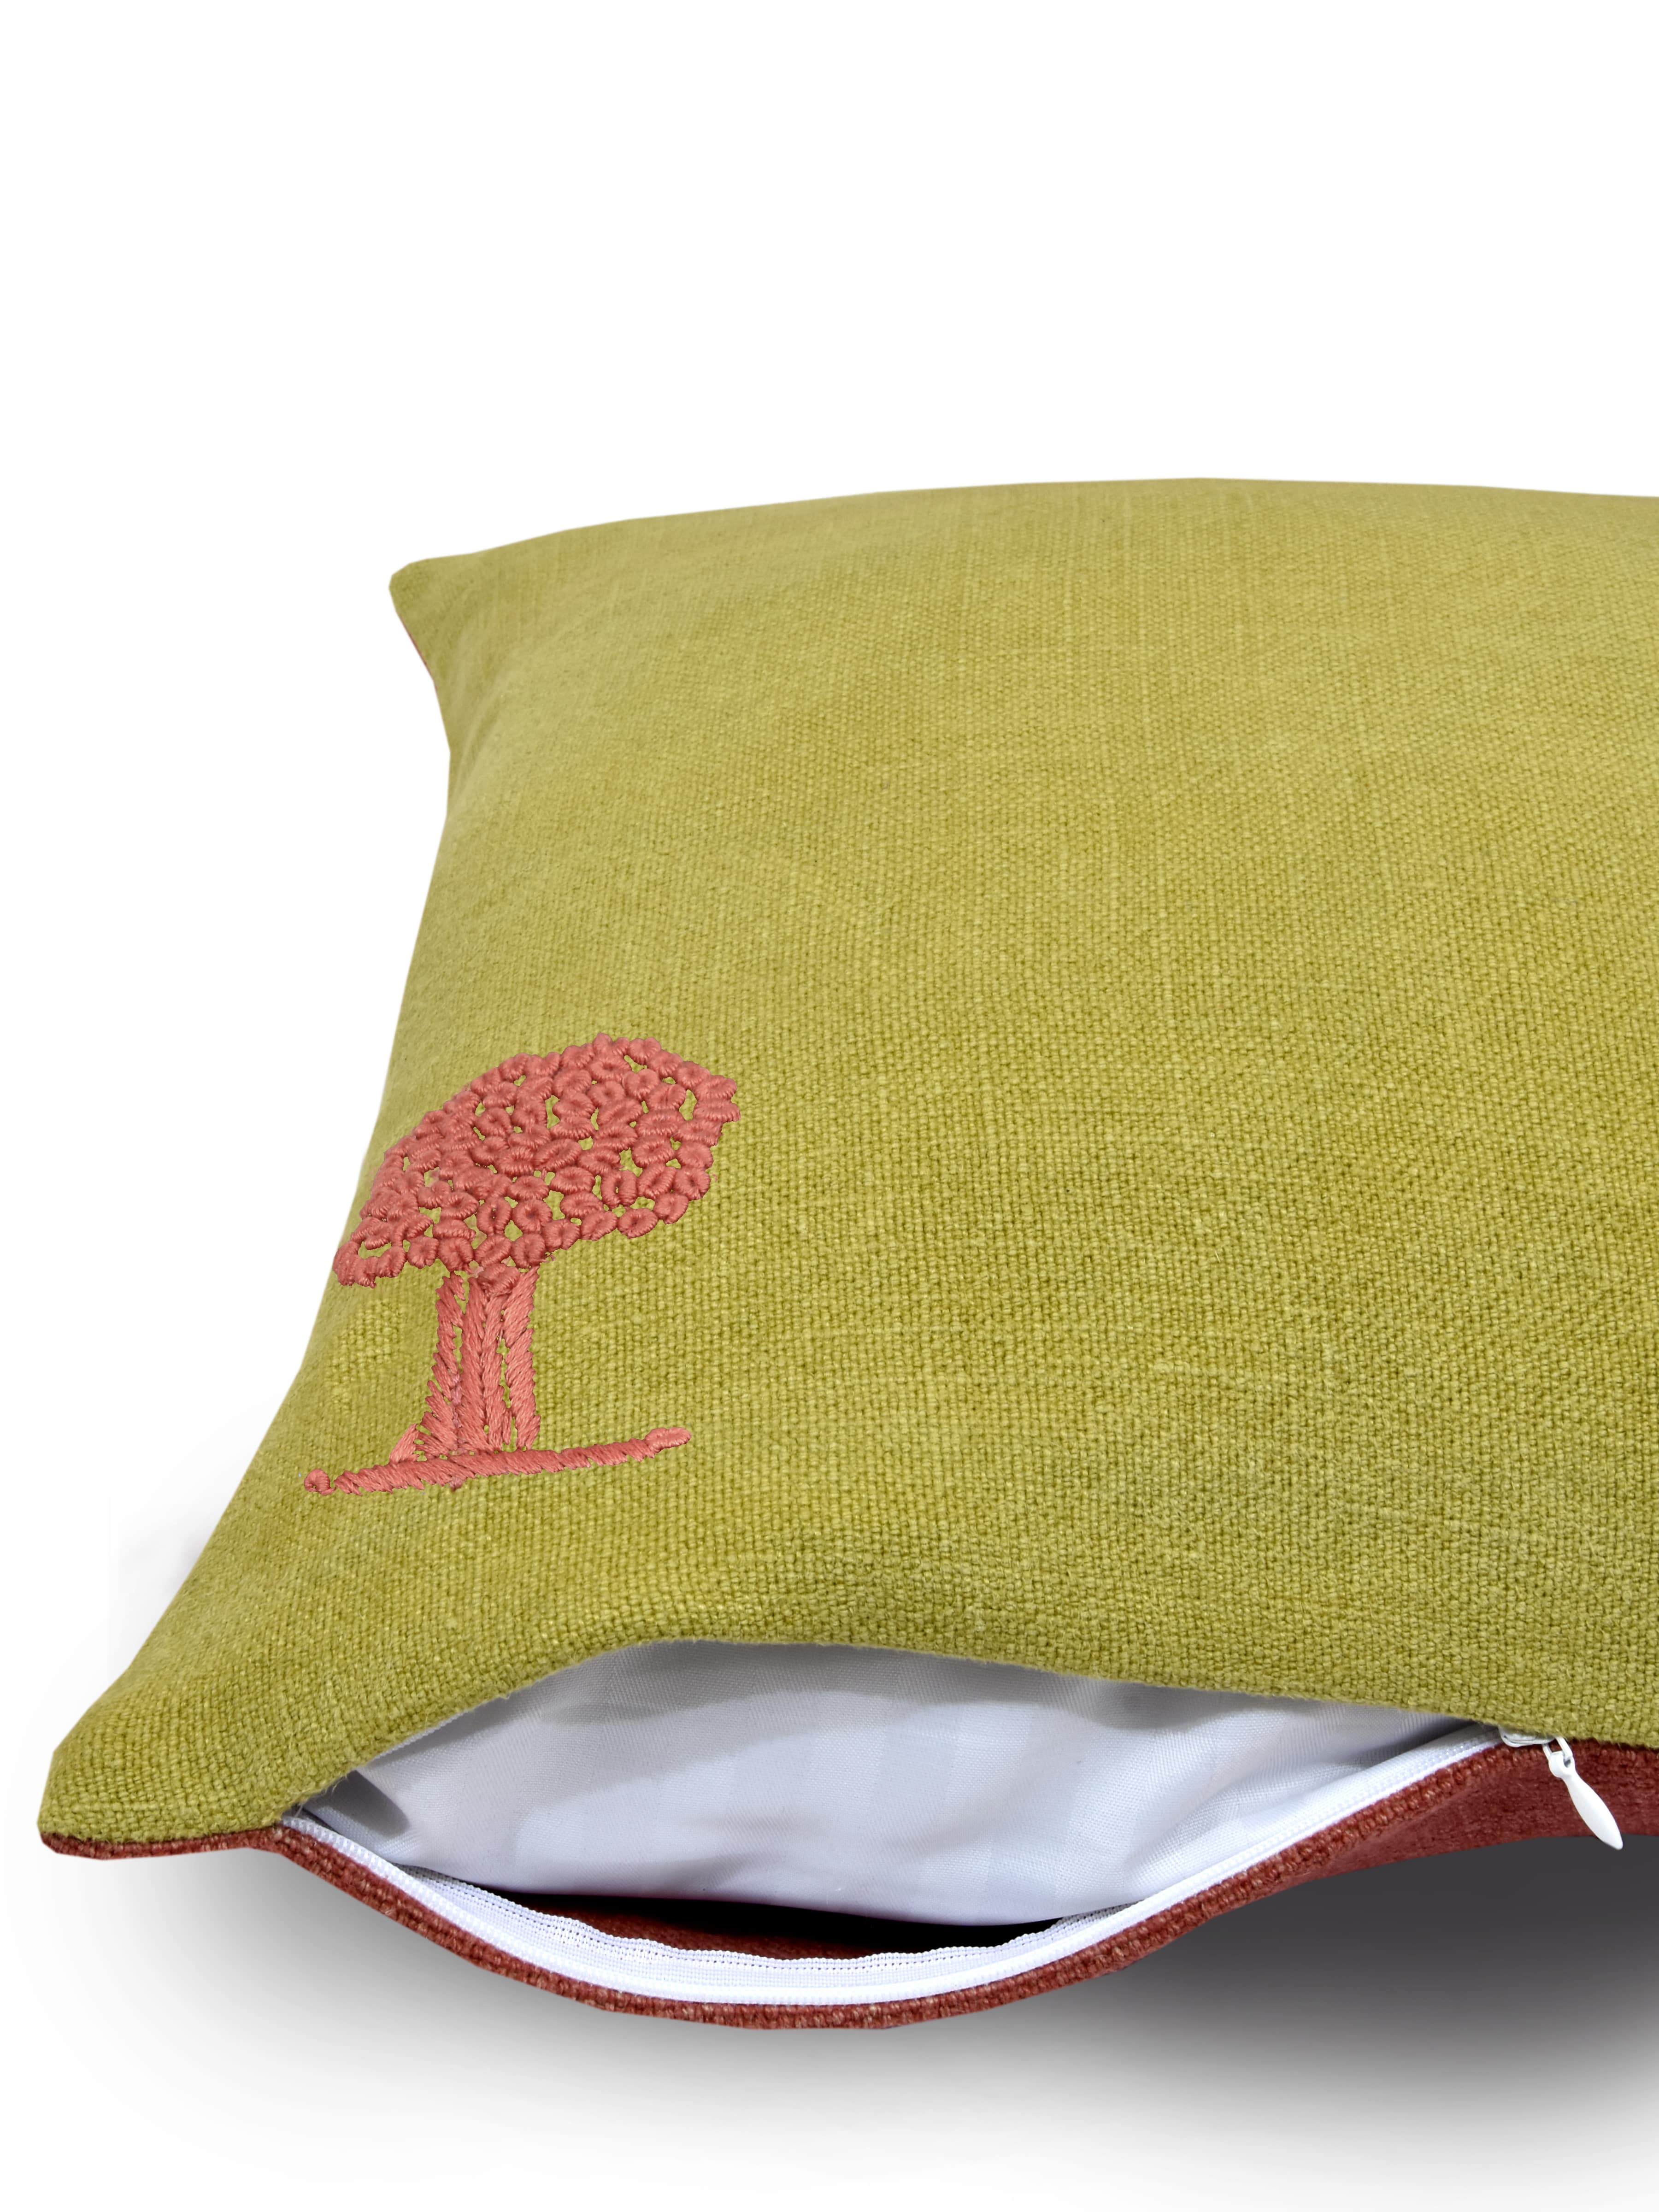 Olive Green and Brown Hemp Tree Hand Embroidered Cushion Cover